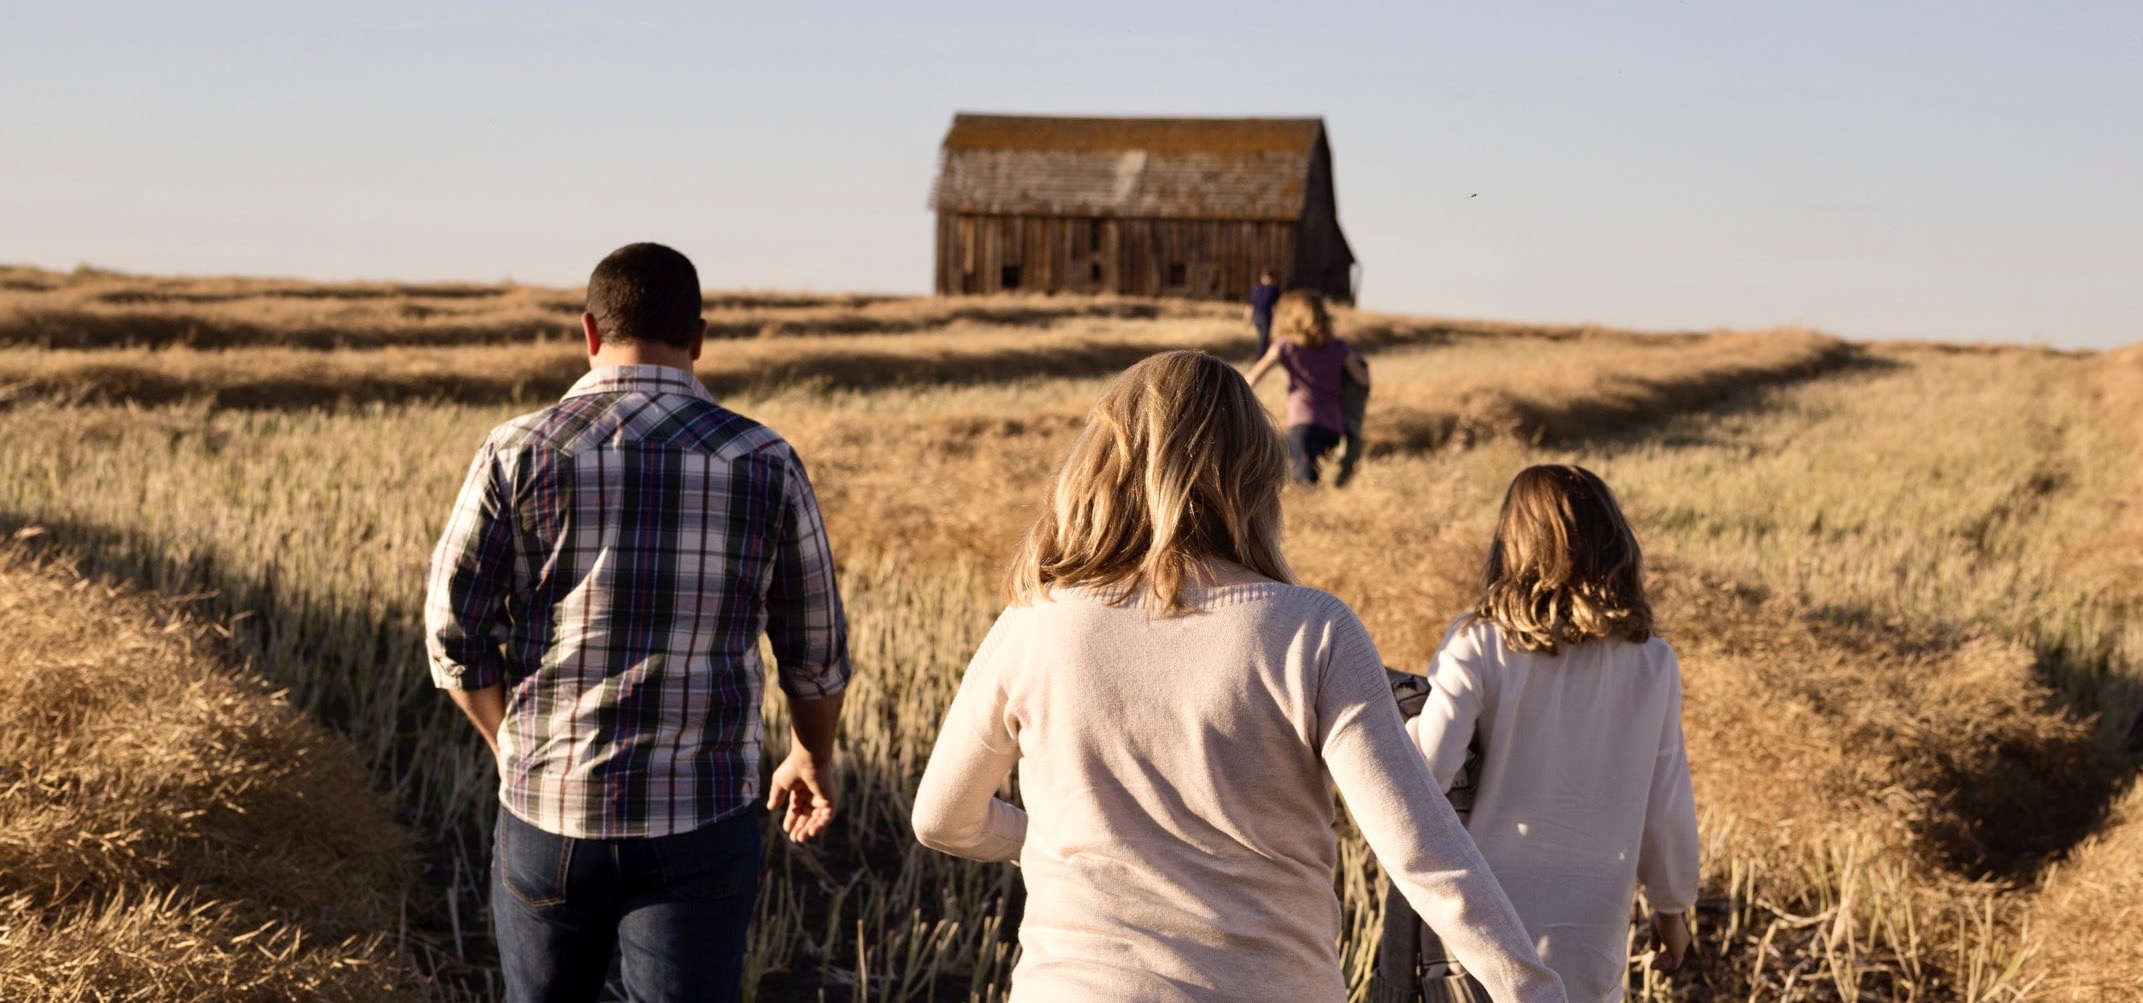 Banner picture of a man, woman, and young girl walking in a grassland field.There is a p;d deserted barn out in the field.